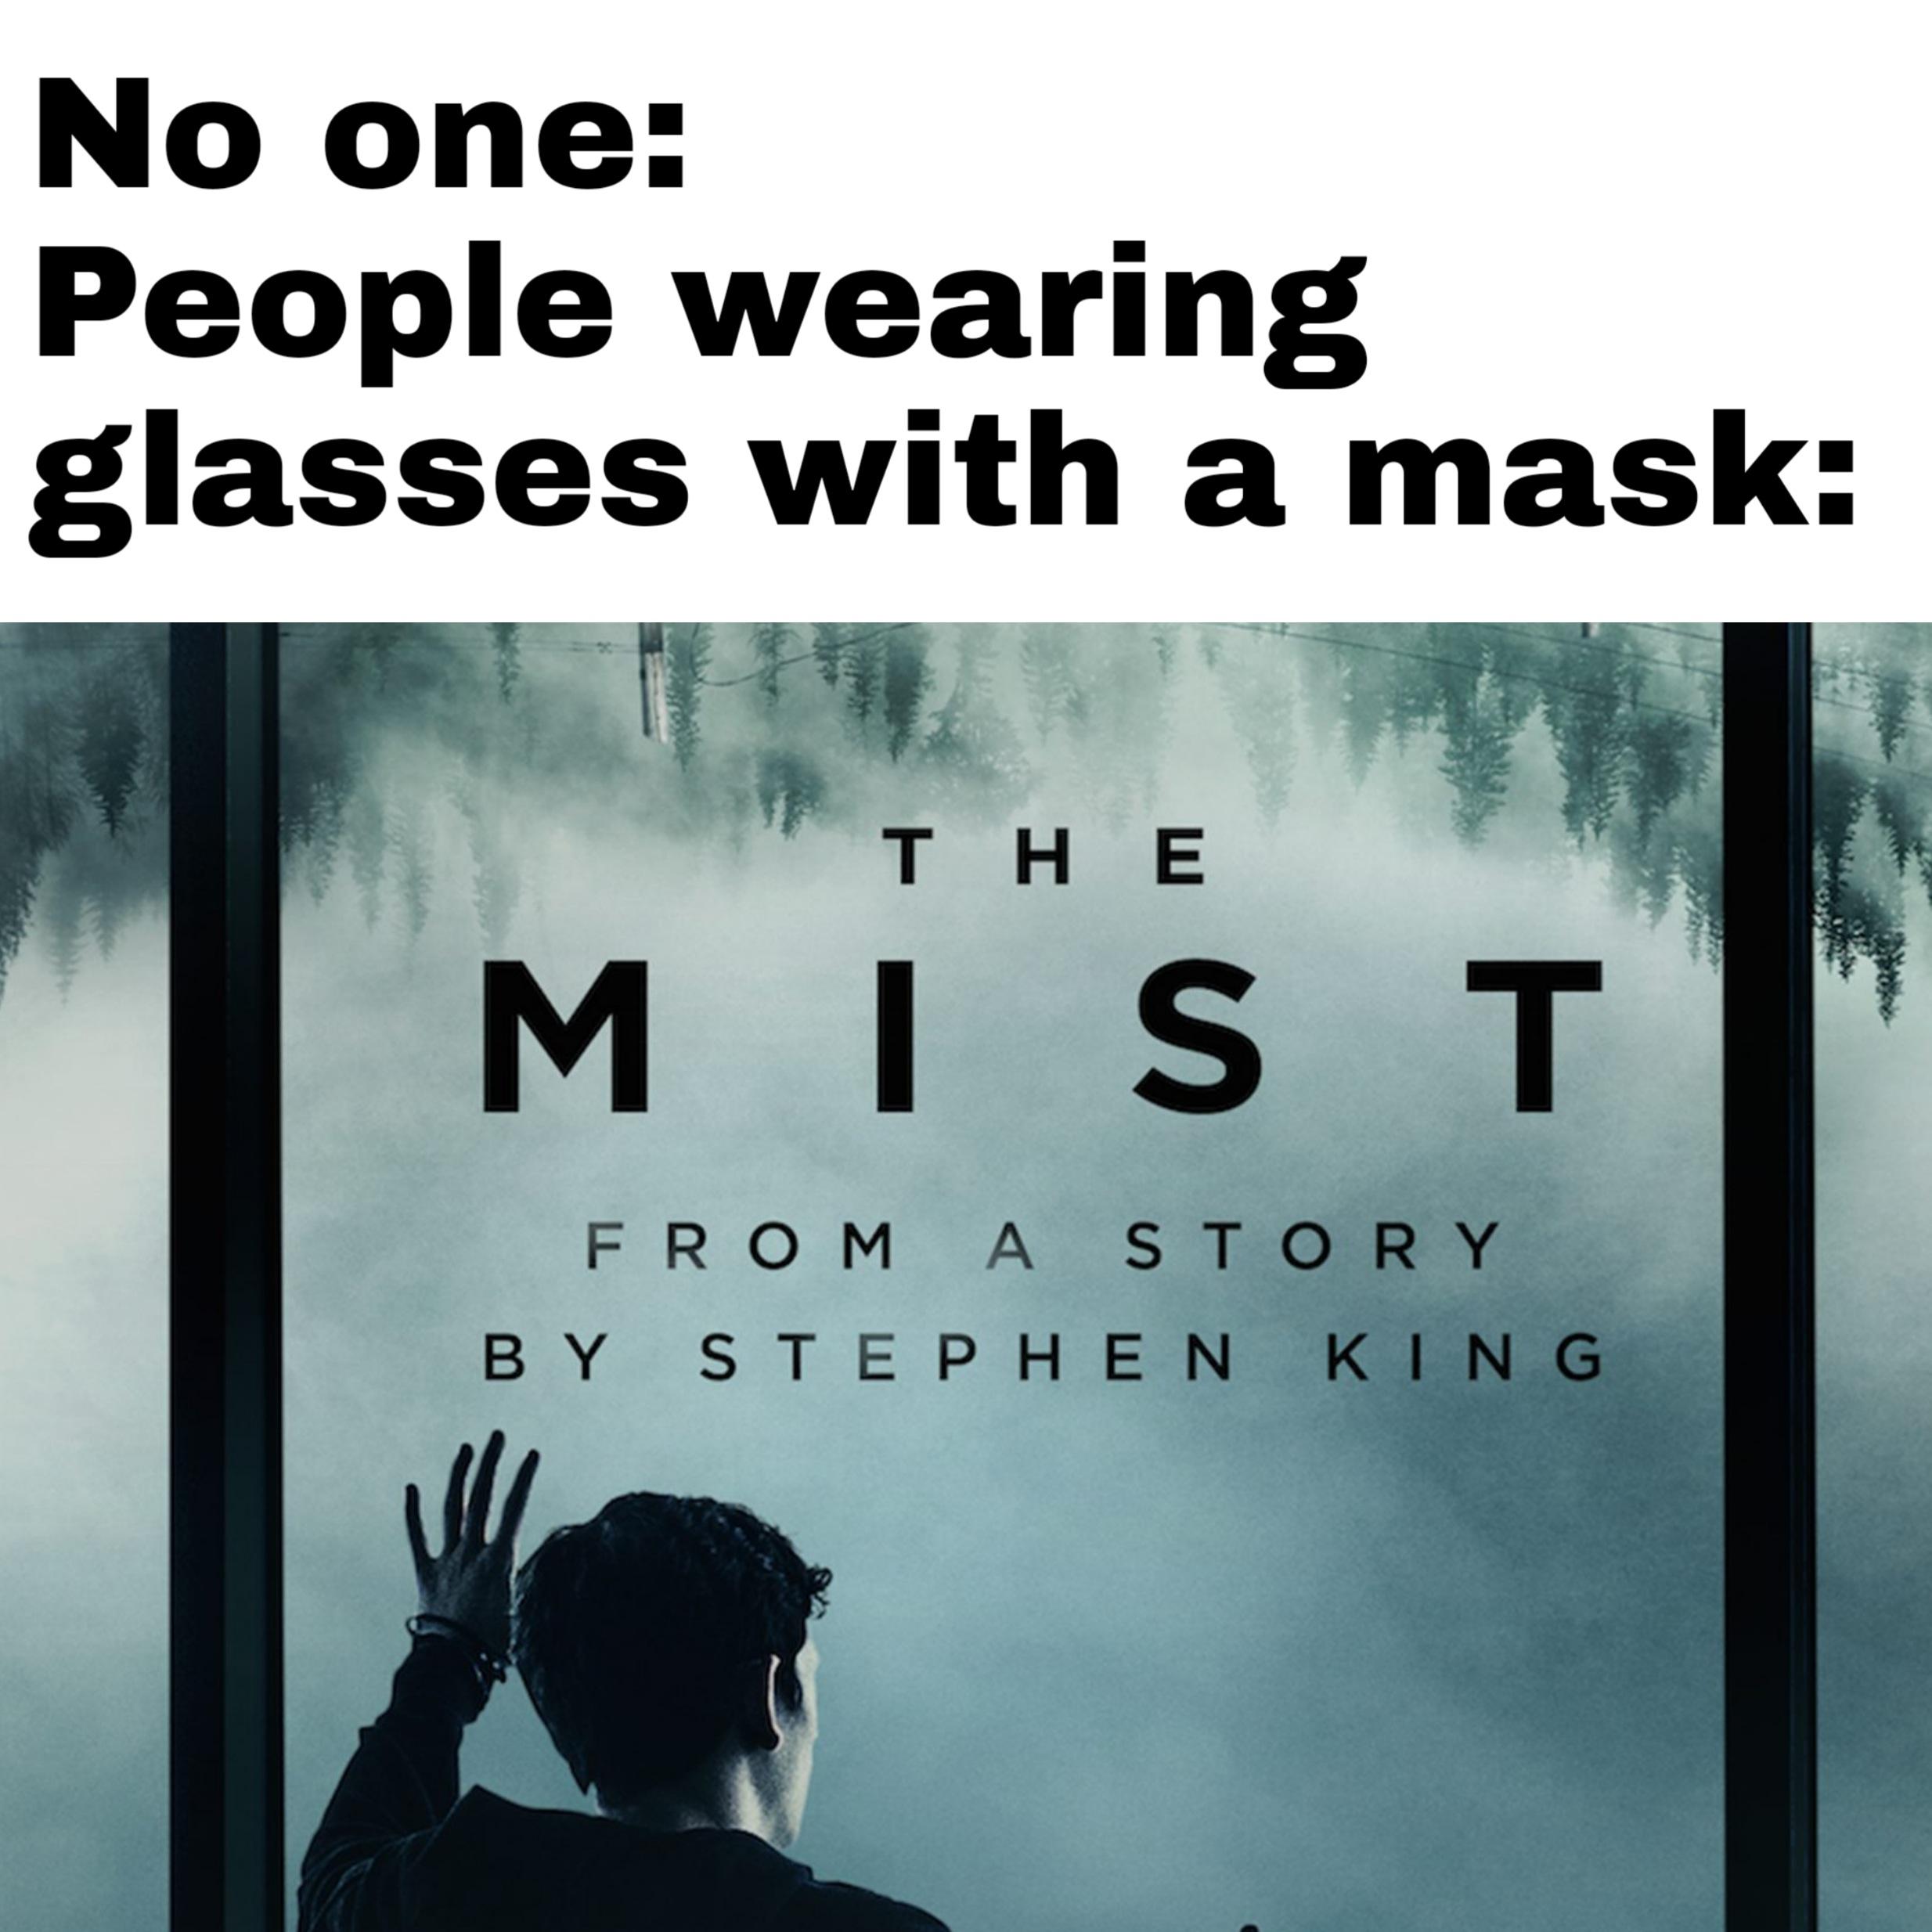 dank memes - poster - No one People wearing glasses with a mask M T S T From A Story By Stephen King